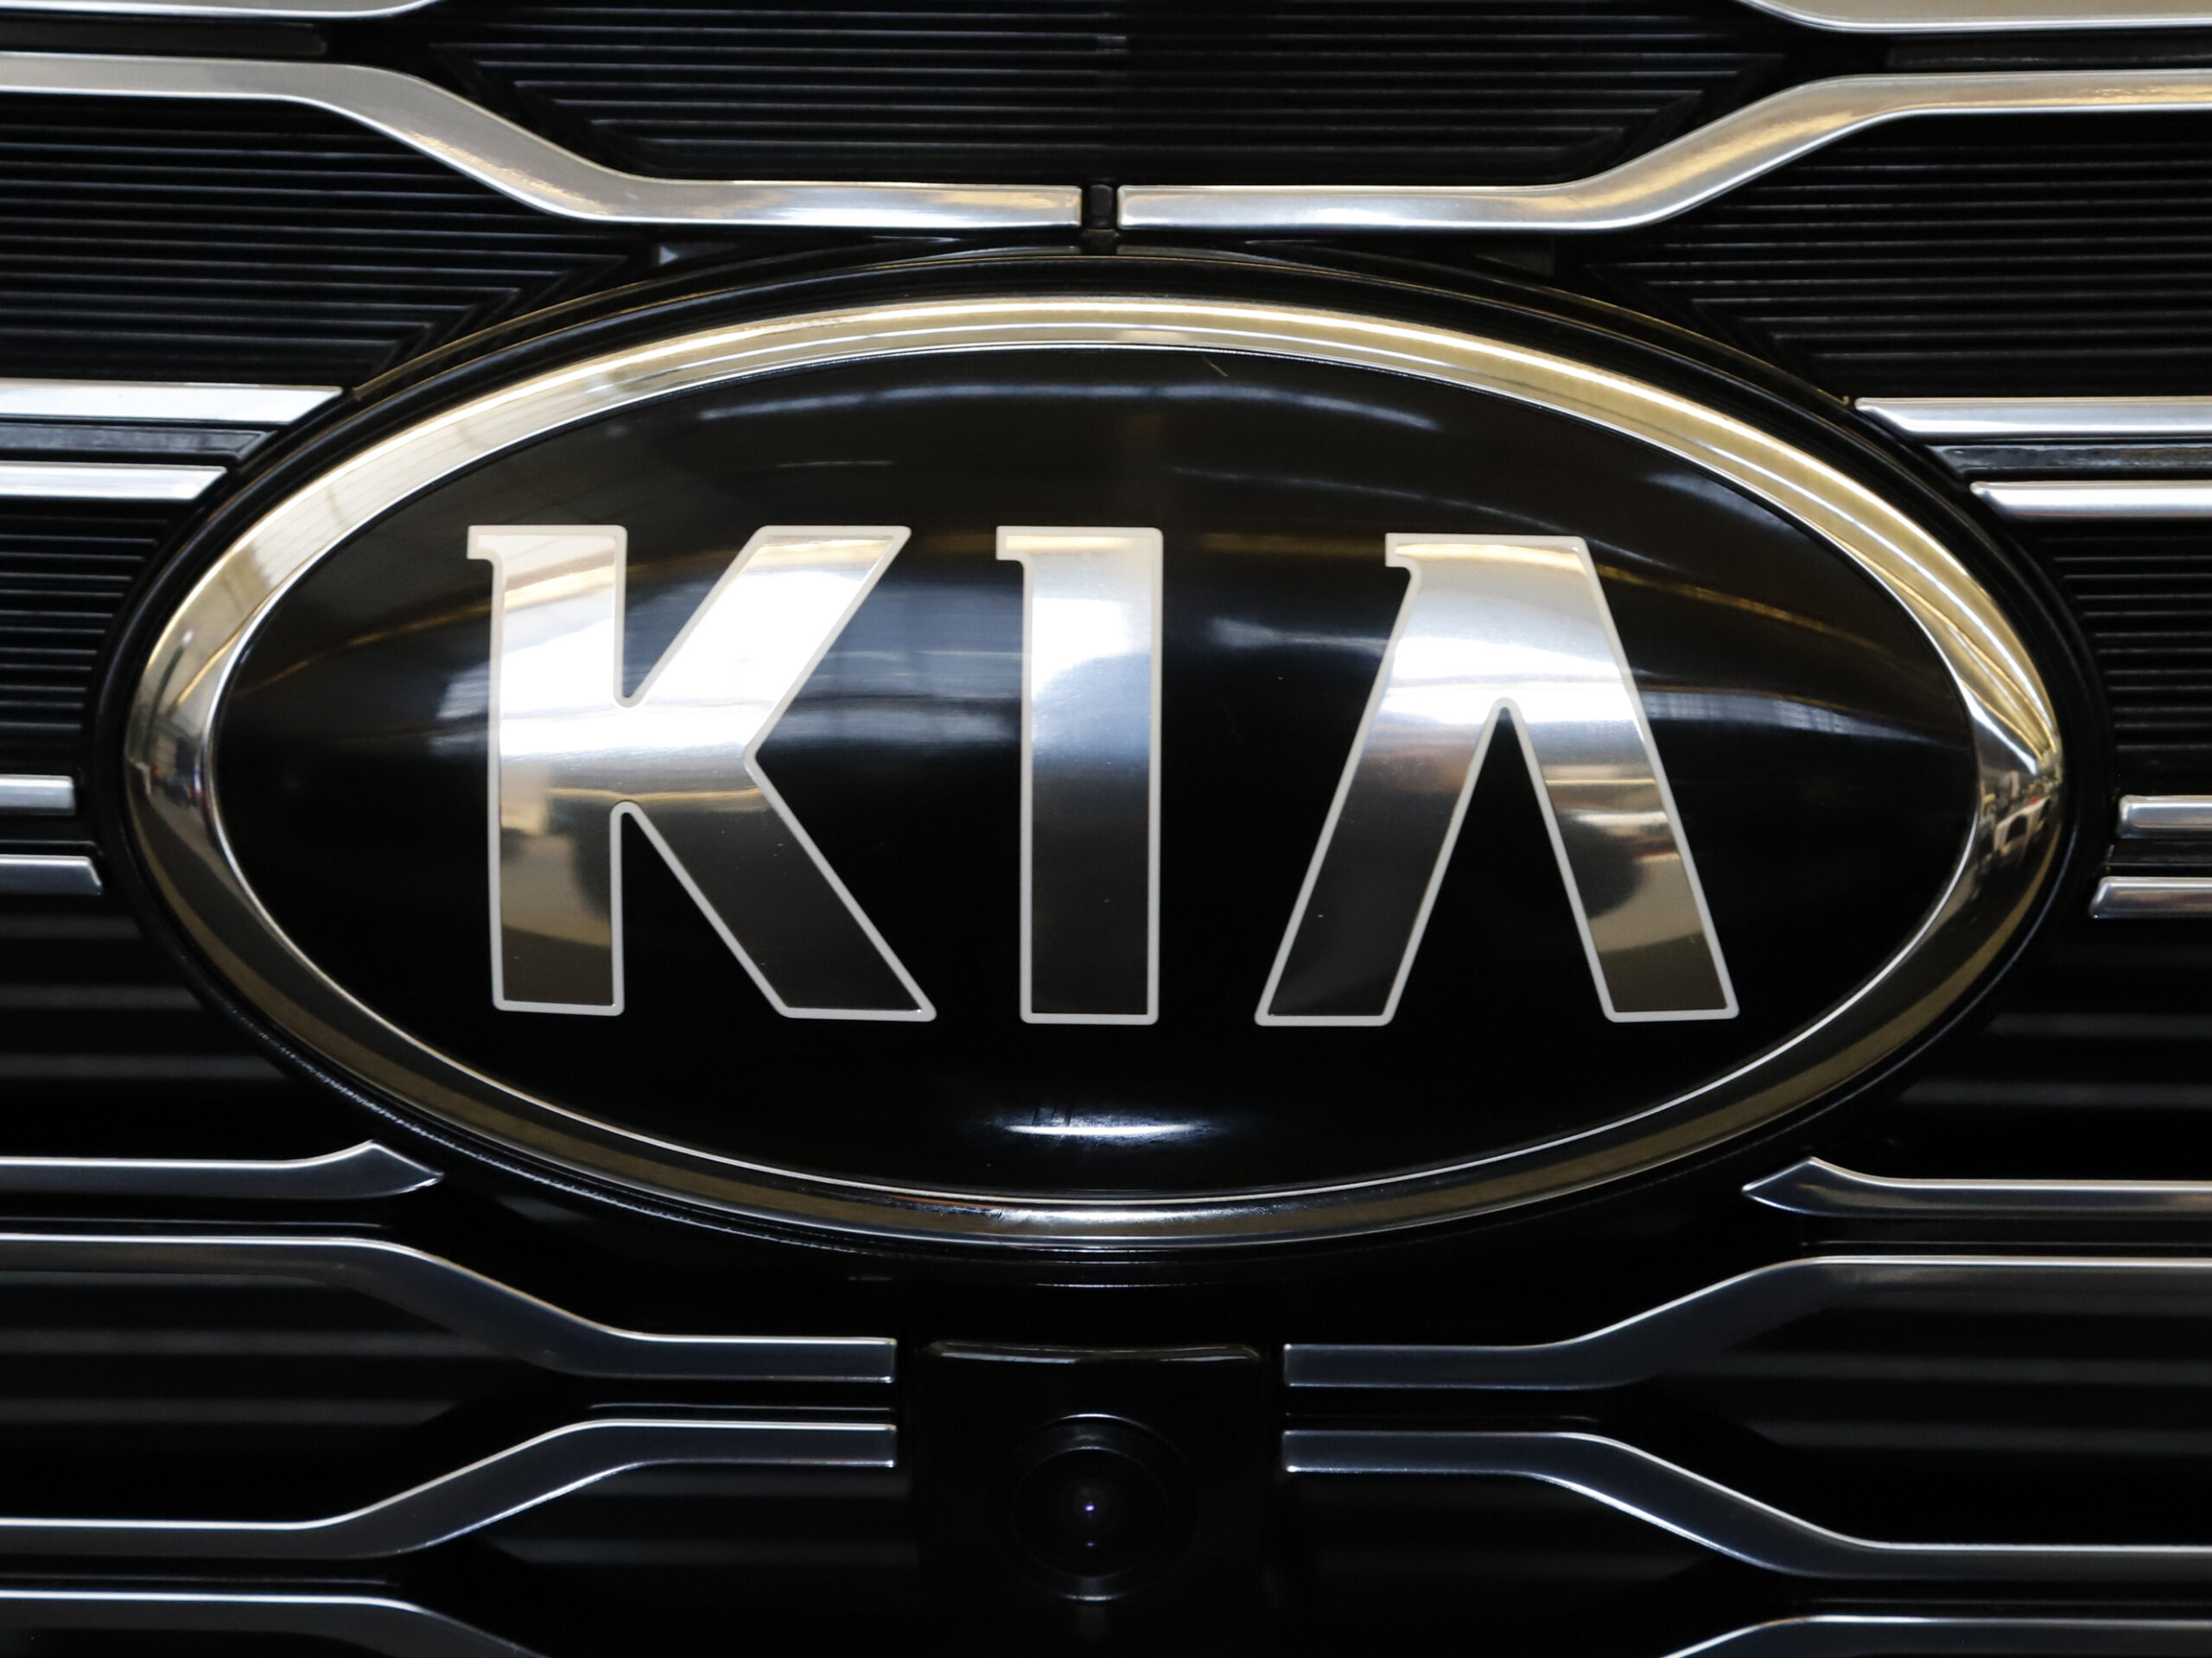 Kia is recalling more than 427,000 of its Telluride SUVs due to a defect that may cause the cars to roll away while they're parked.